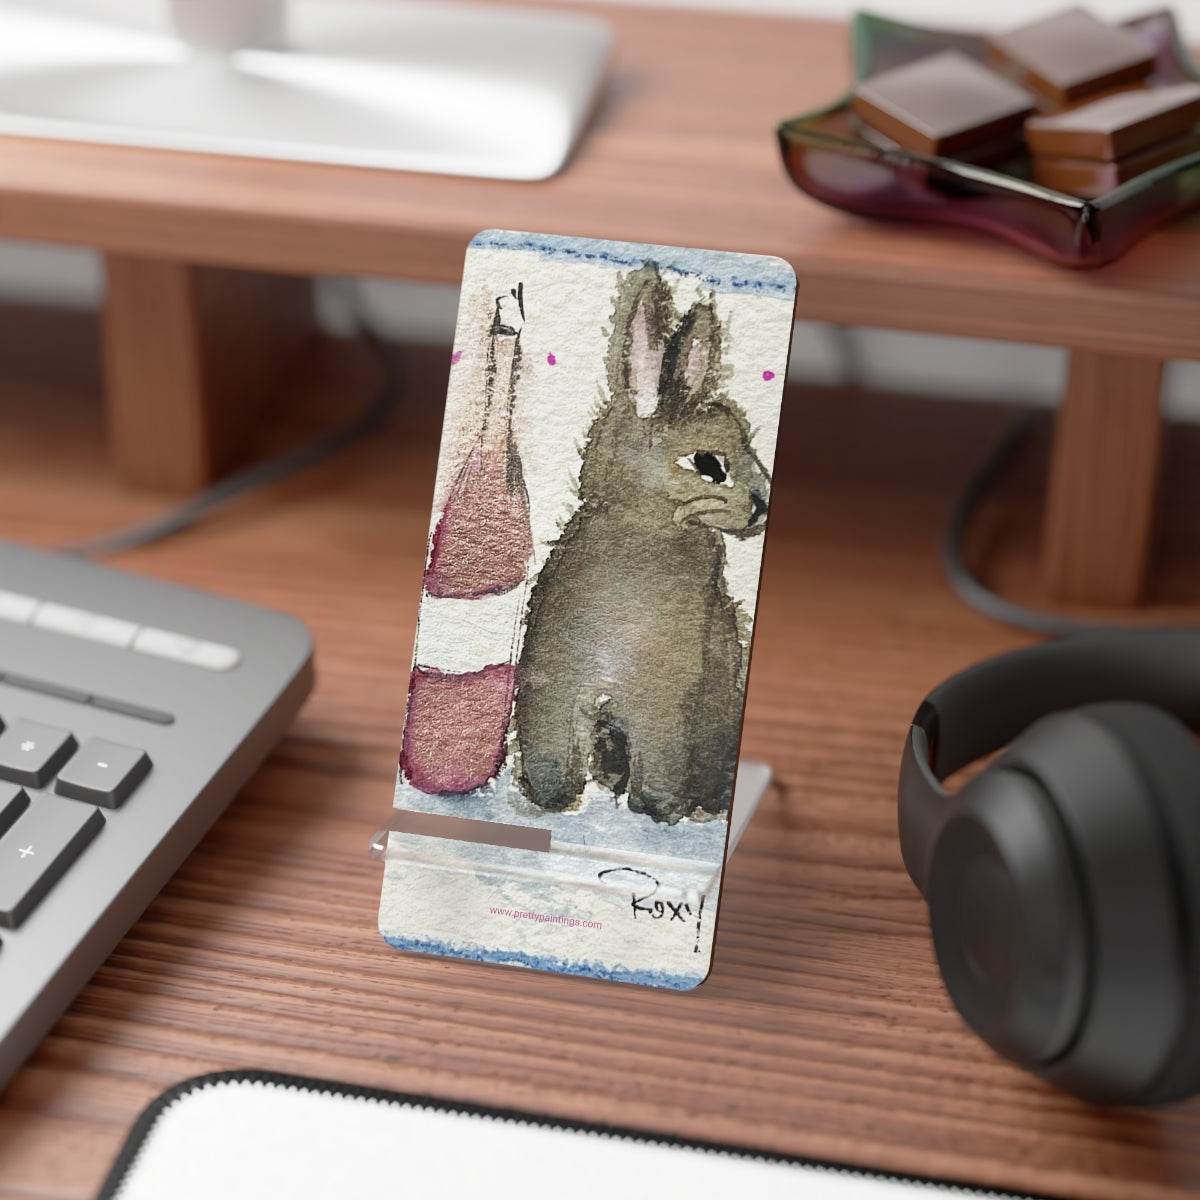 Drunk Bunny #1 (Bunny & Bottle) Cell Phone Stand